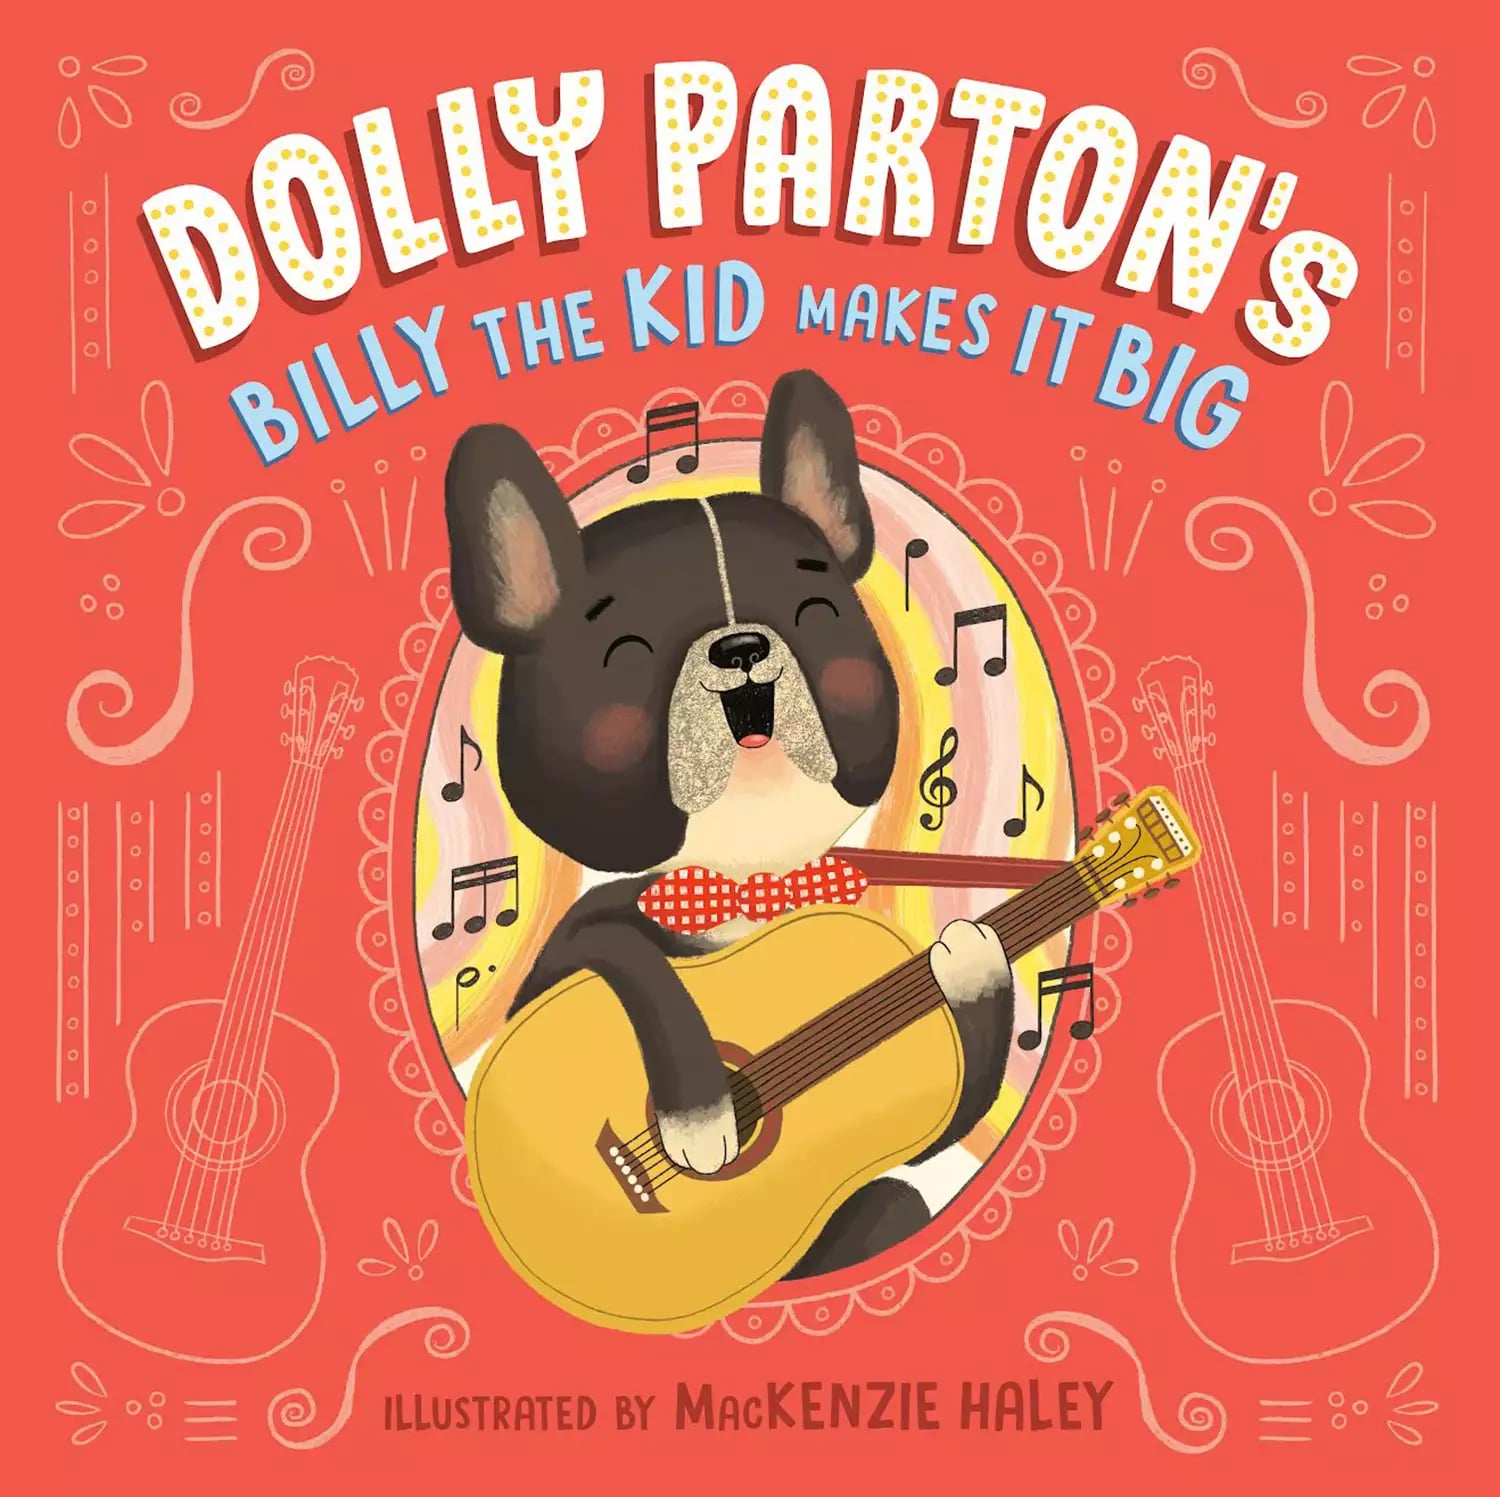 dolly-parton-has-a-new-children-s-book-about-billy-the-kid-popsugar